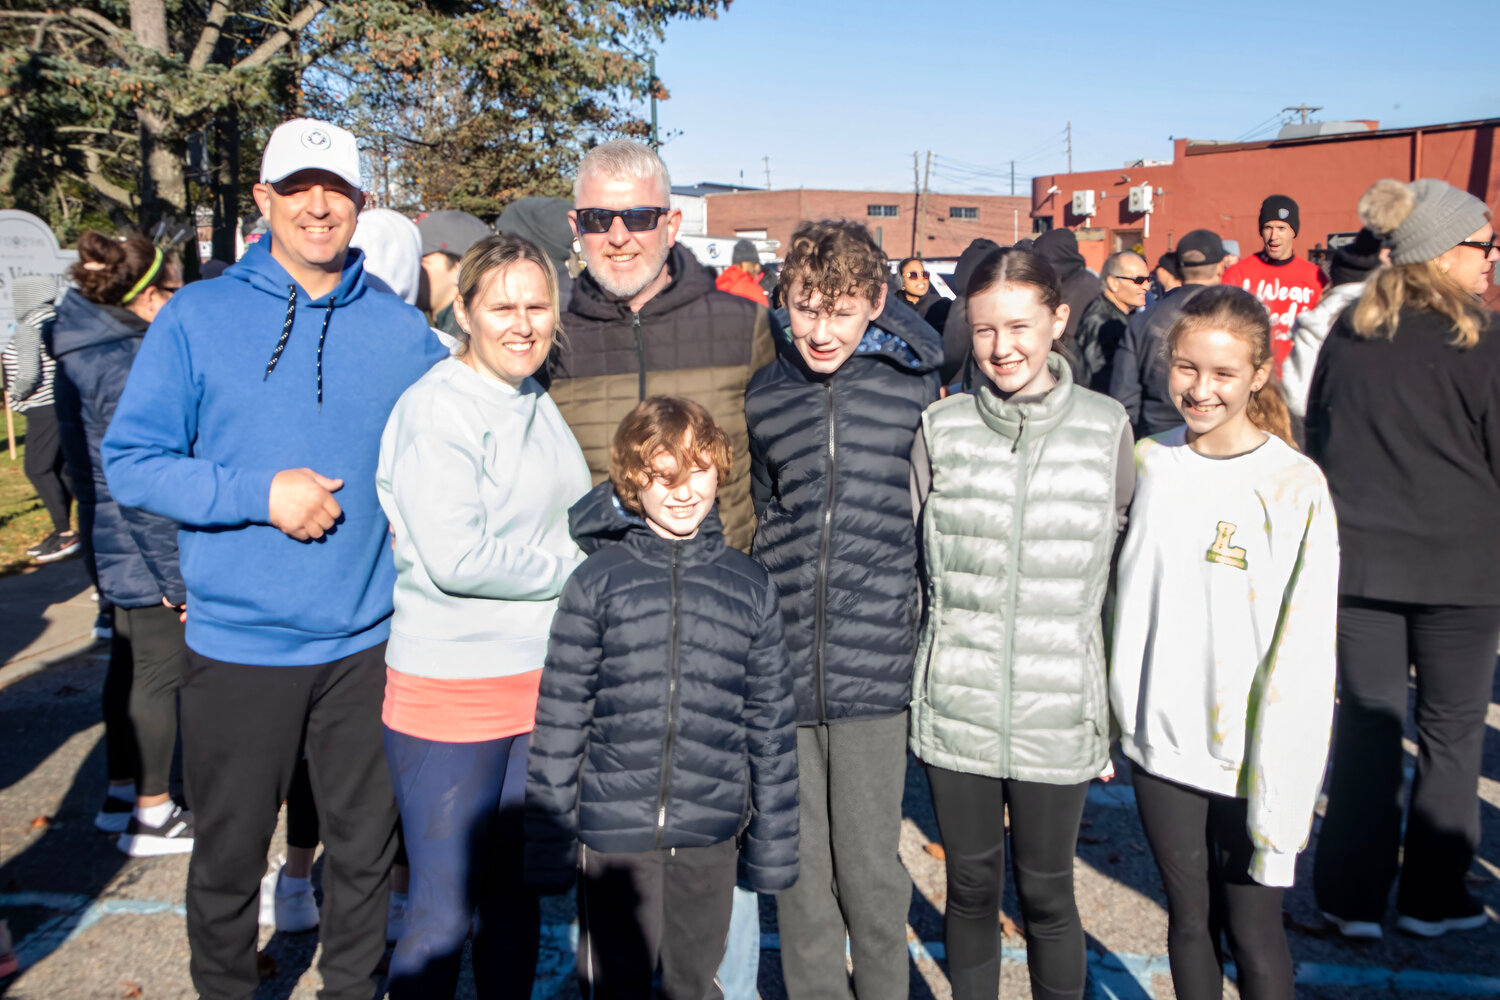 Entire families came out to Gries Park on Thanksgiving morning for a 5k turkey trot in support of a good cause — helping children with congenital heart defects.